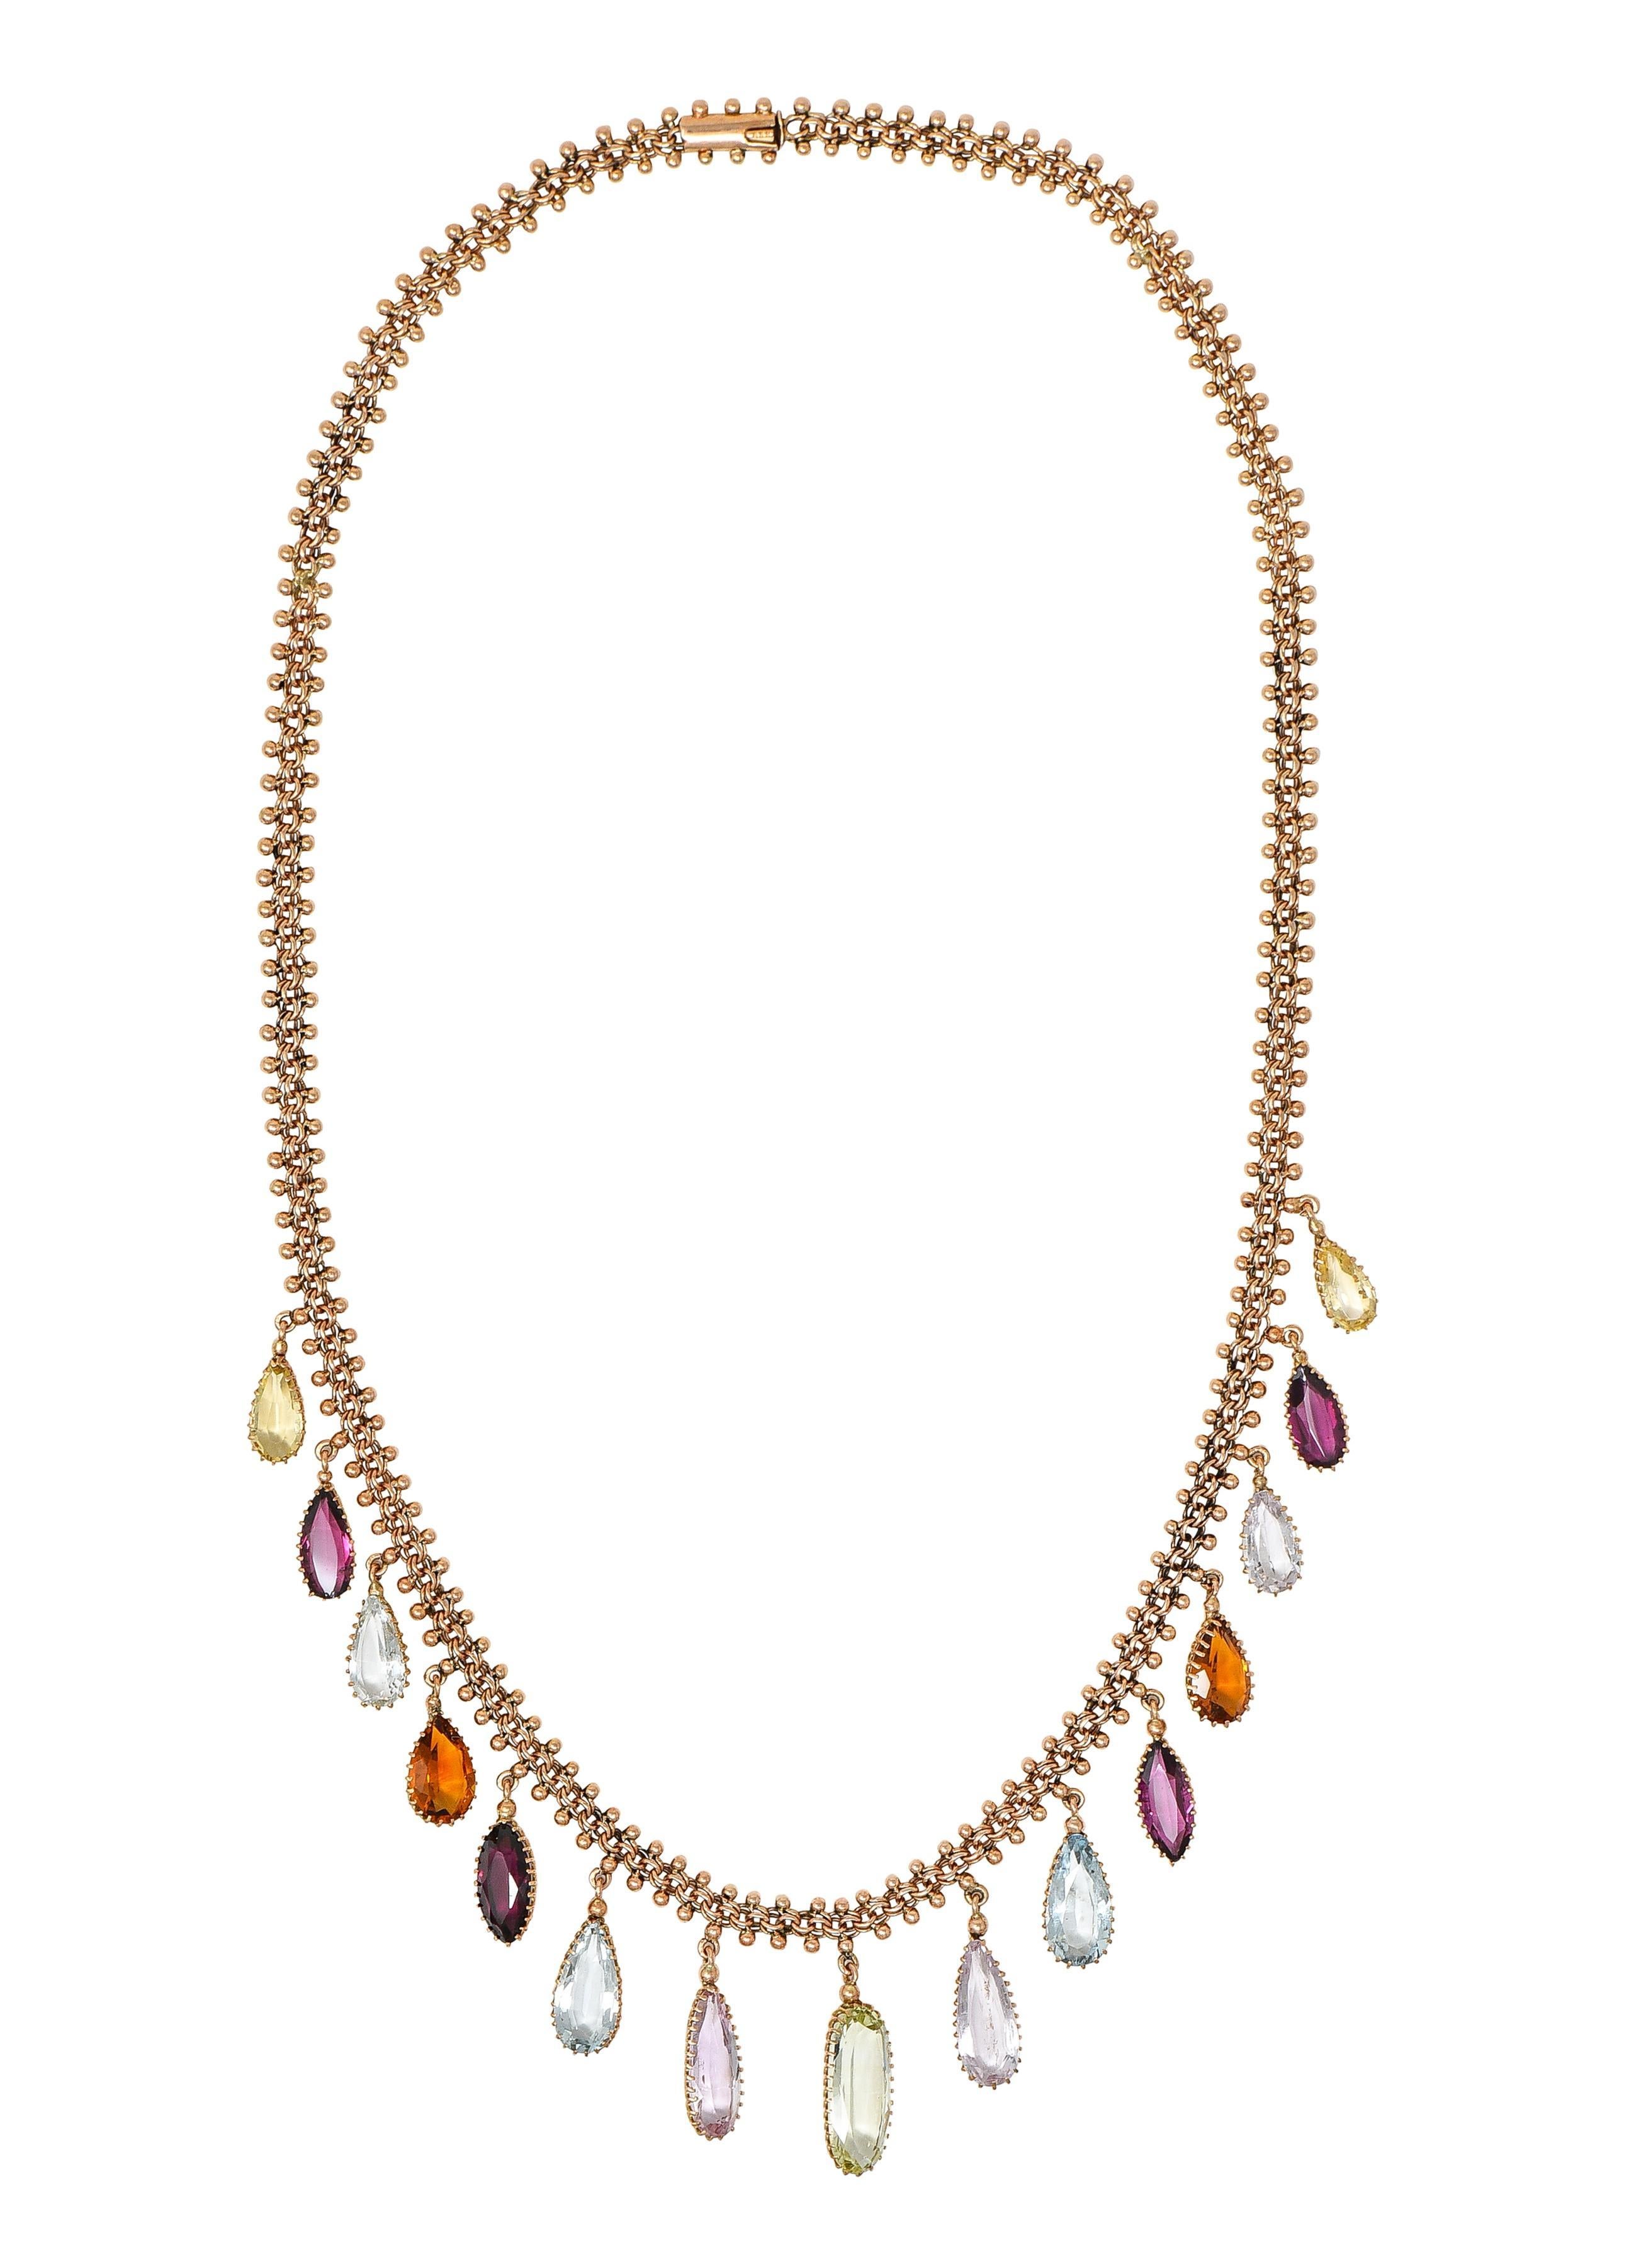 Designed as a fancy mesh chain with gold beading centering graduated multi-gem fringe station
Comprised of tourmaline, citrine, topaz, and aquamarine ranging in size and cut 
Transparent brownish orange, medium pink, light pink, green, and blue in